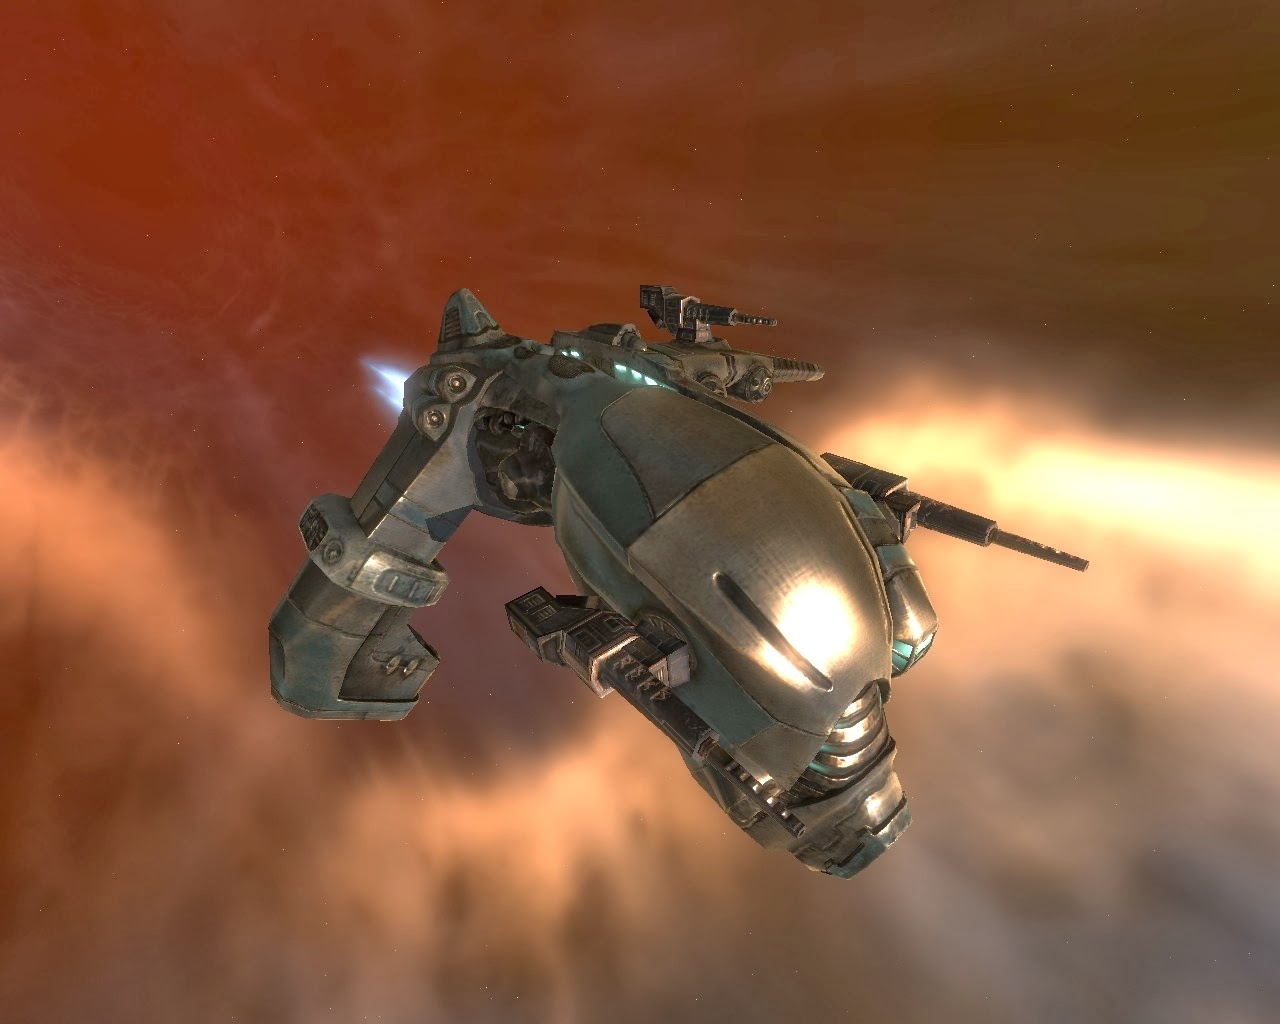 eve-online-best-solo-pvp-ship-2020